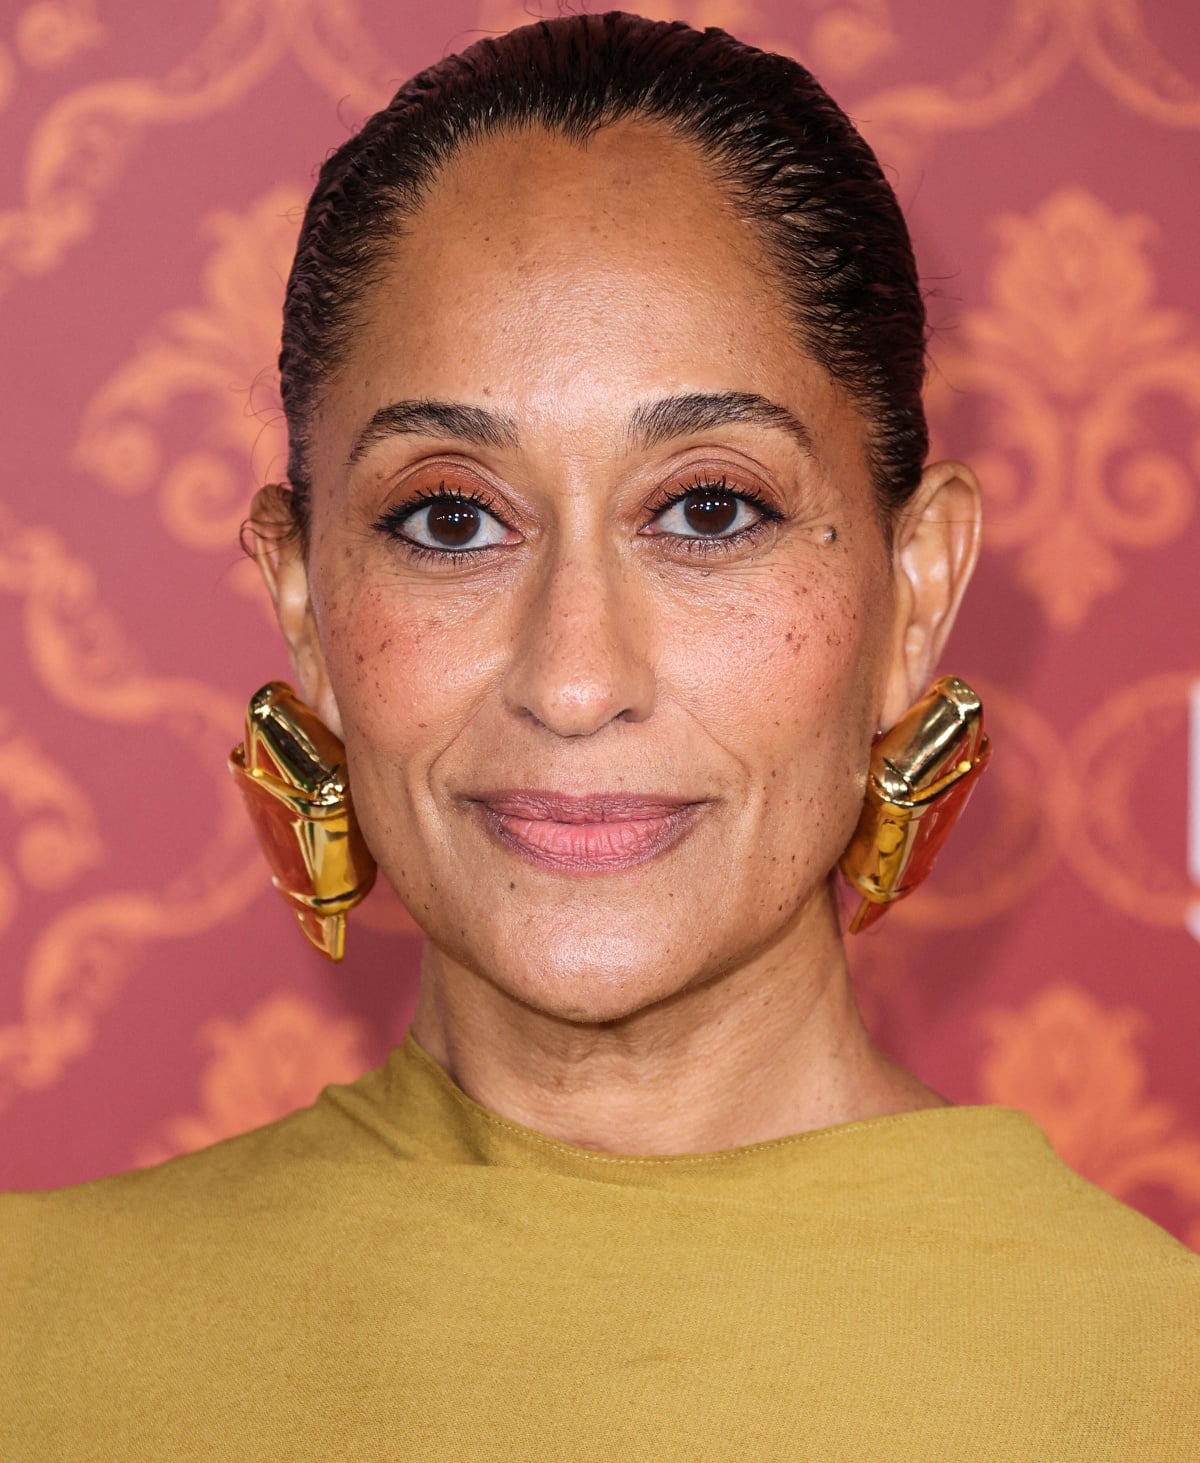 Tracee Ellis Ross’ beauty look consisted of warm eyeshadow, rosy cheeks, a pink lip, a sleek bun, and large abstract gold earrings